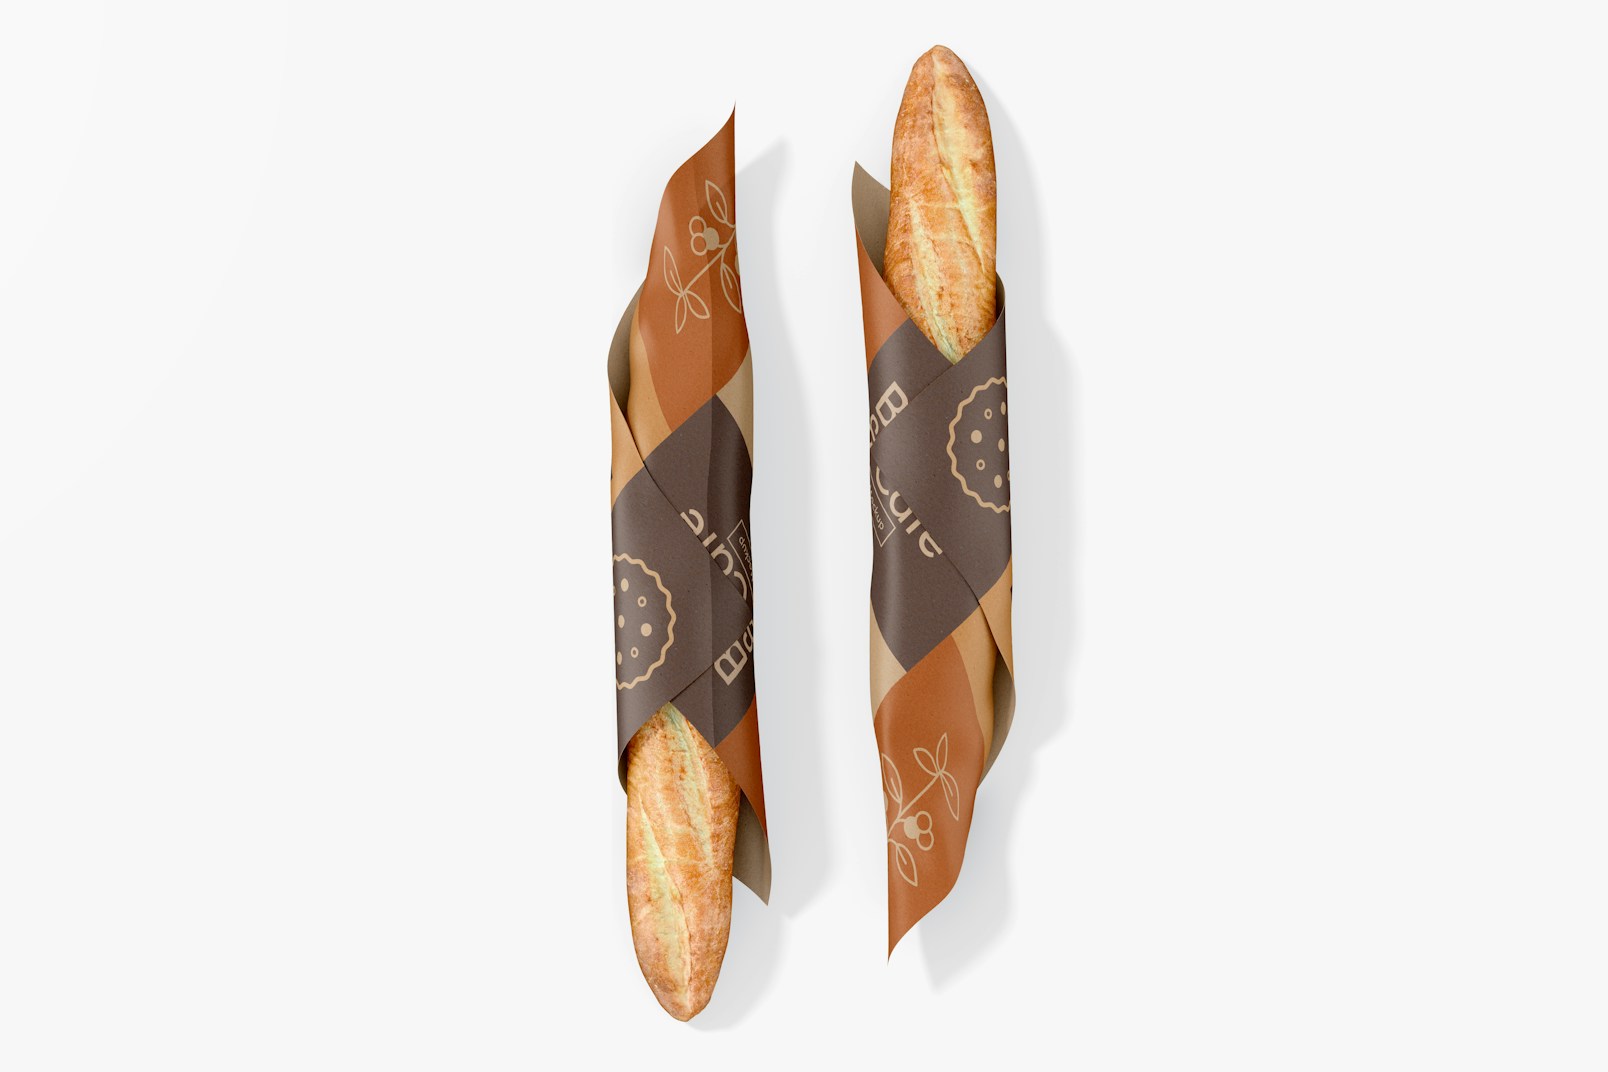 Bread Wrapping Paper Mockup, Top View